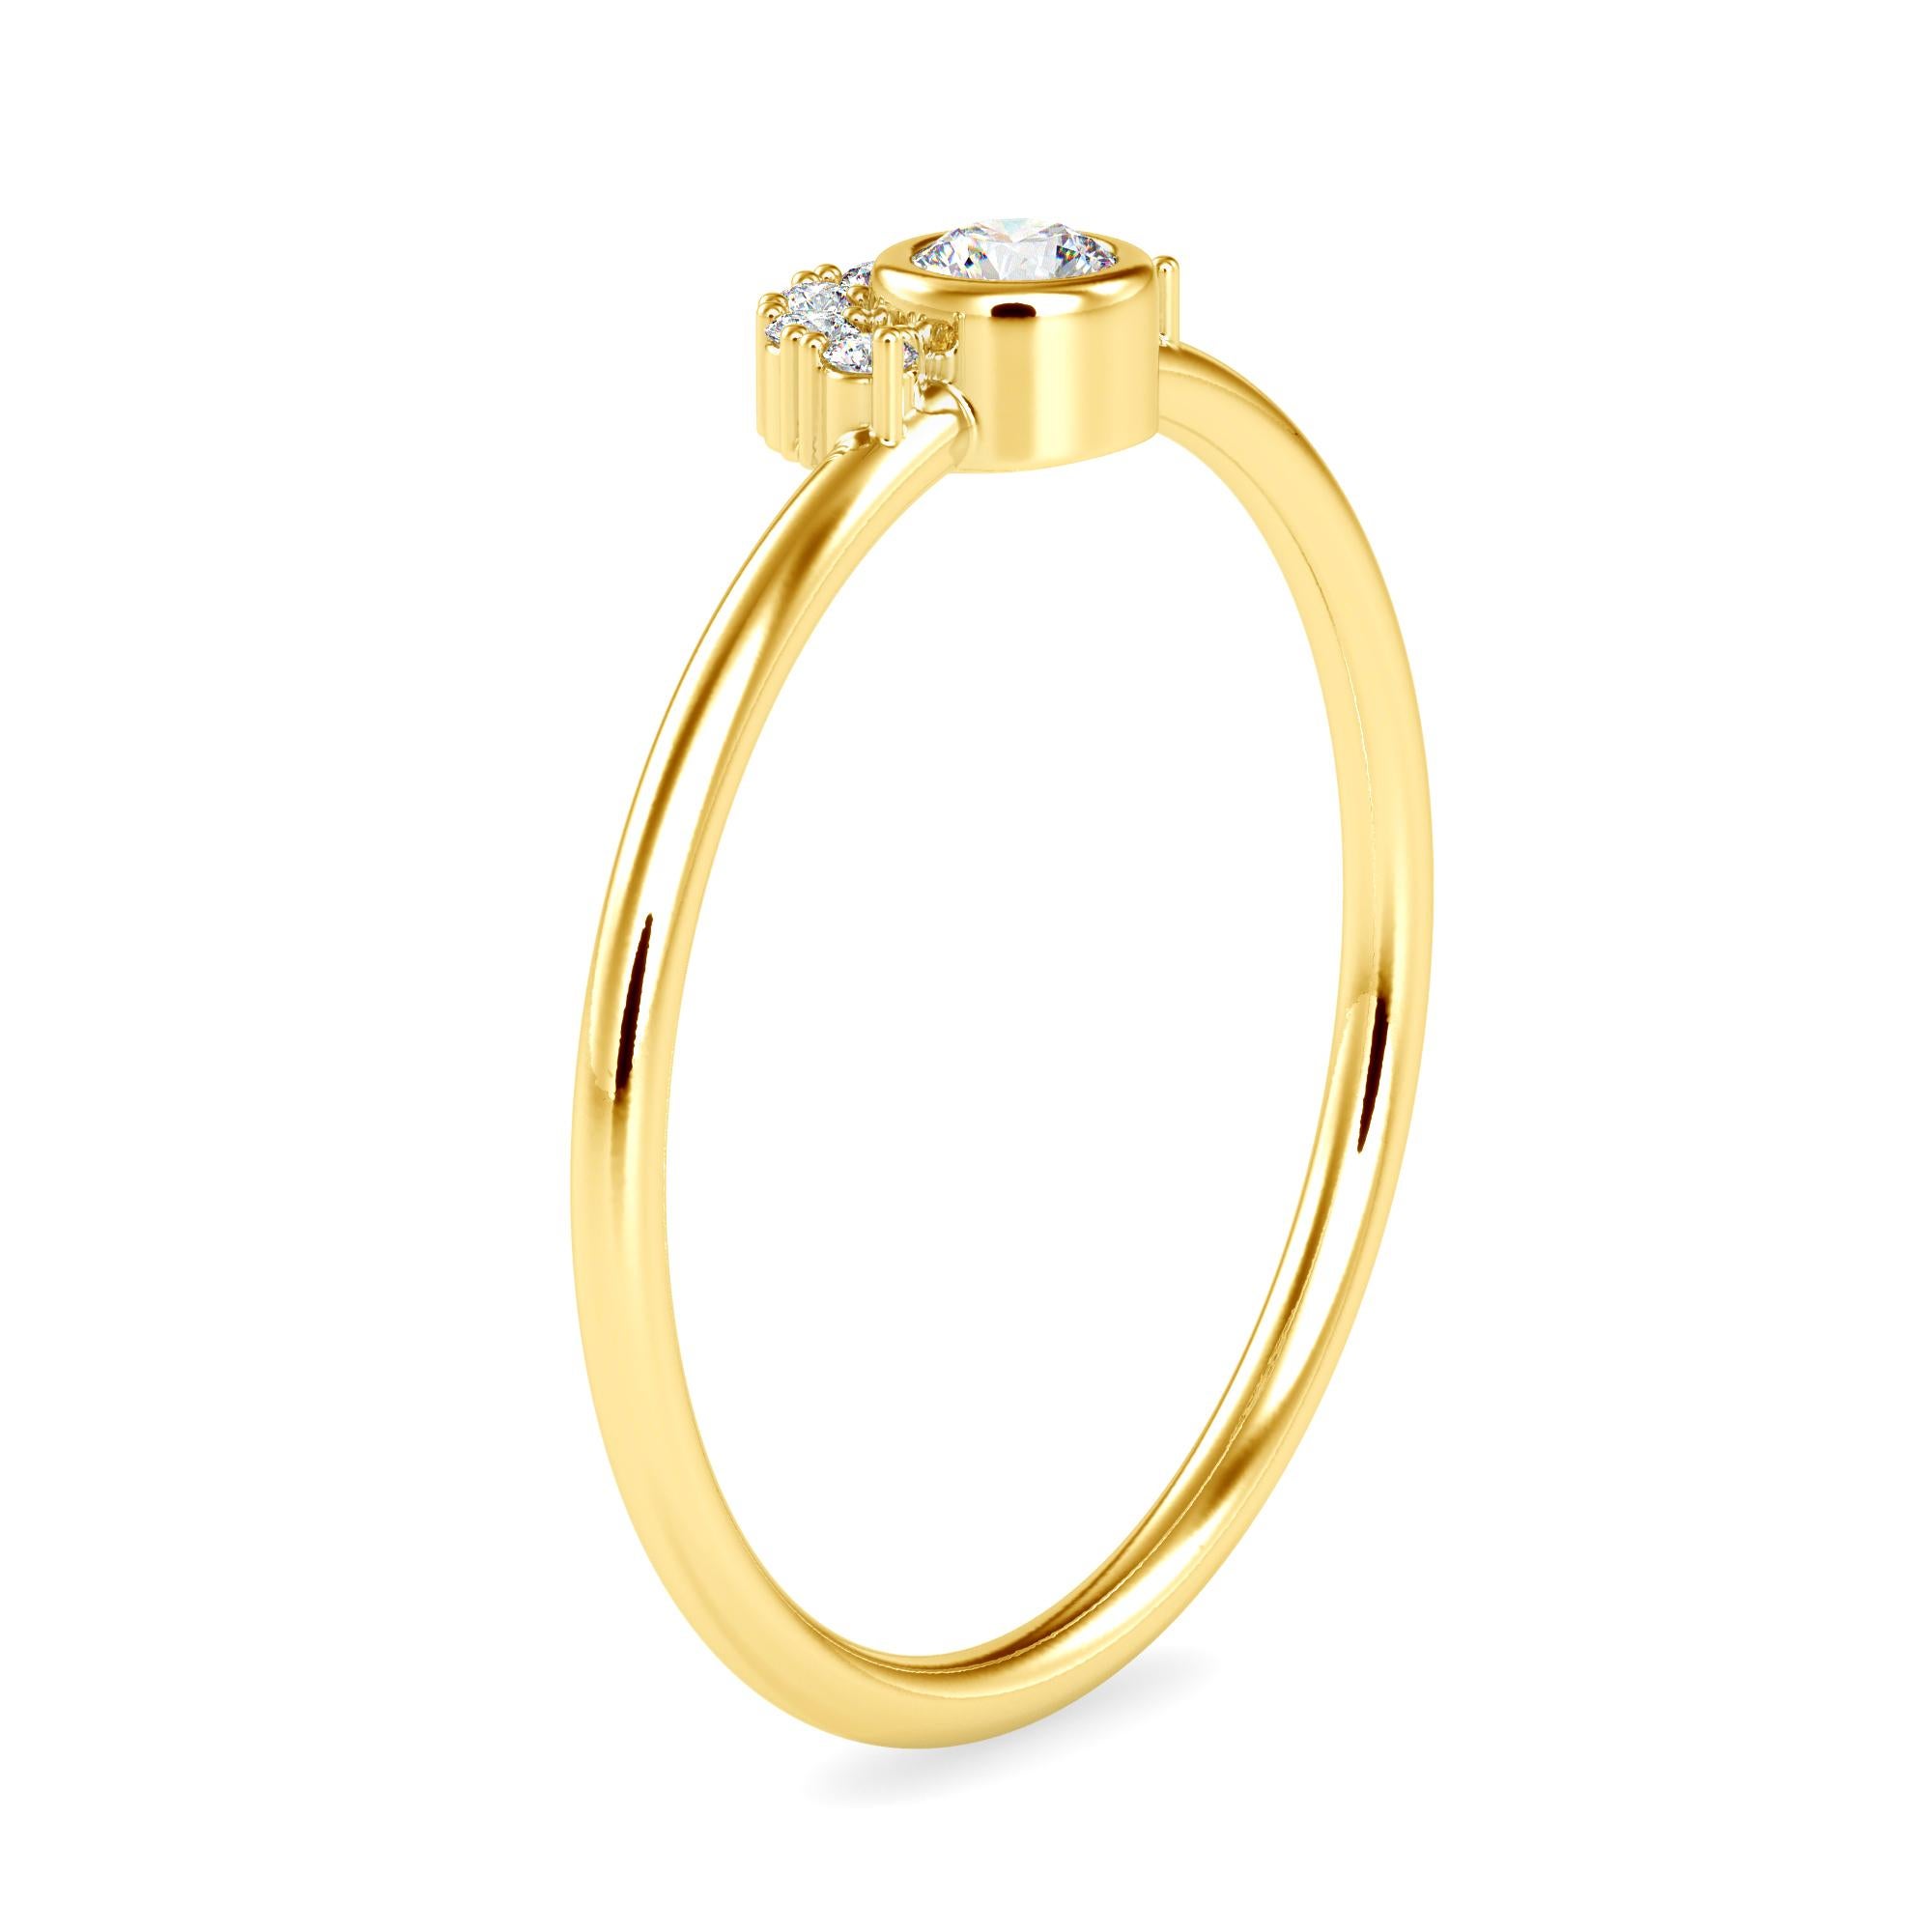 0.13 Carat Diamond 14K Yellow Gold Ring In New Condition For Sale In Los Angeles, CA